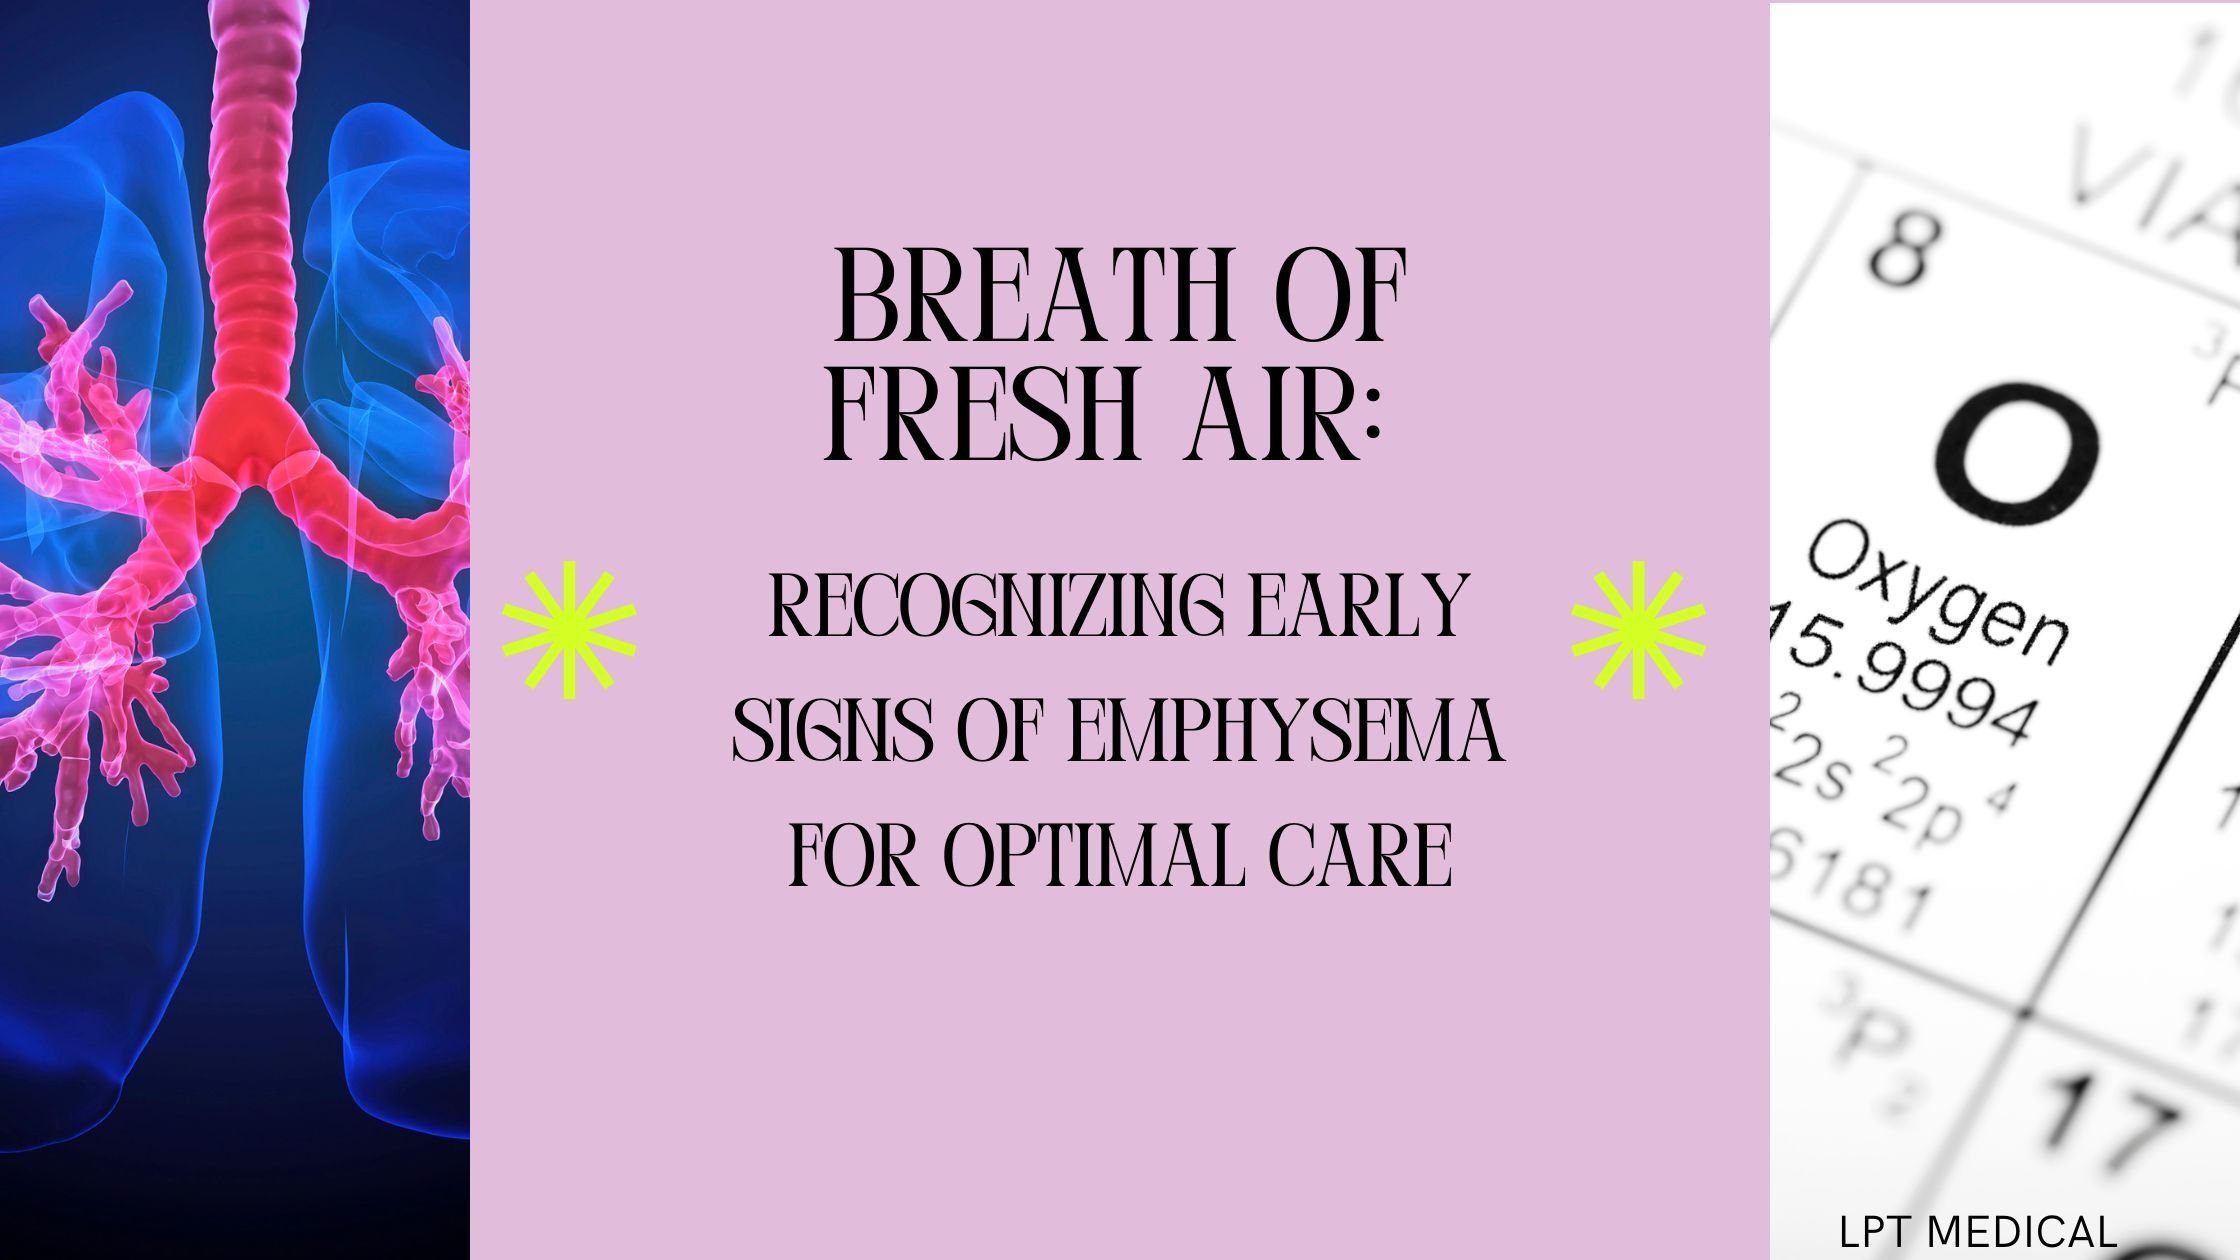 Breath of Fresh Air Recognizing Early Signs of Emphysema for Optimal Care